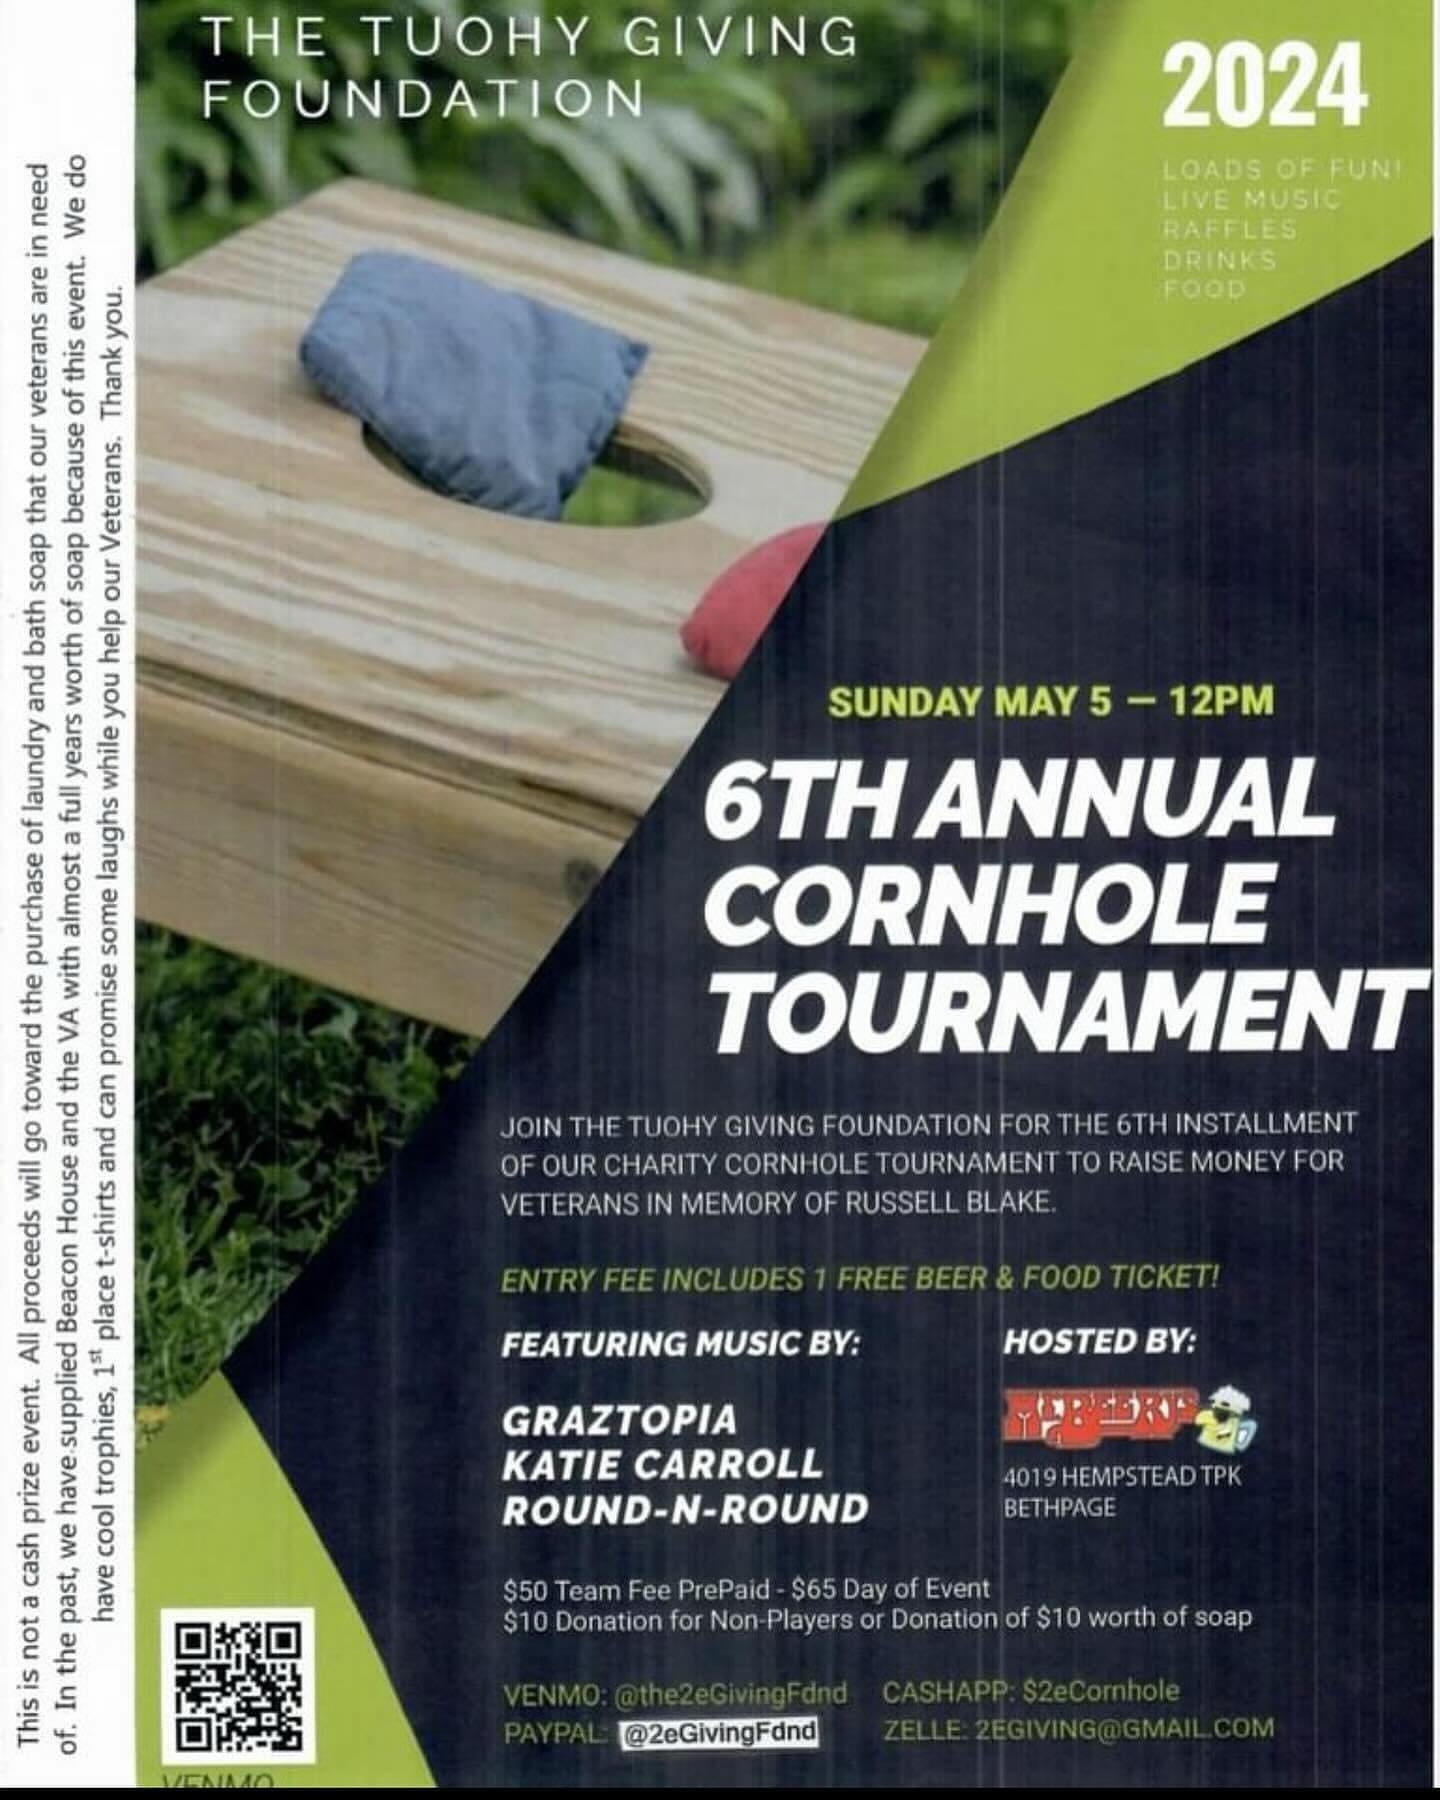 Hey now! Like Wavy Gravy says &ldquo;Put your good where it can do the most&rdquo; and this Sunday afternoon (5/5) is the 6th annual @2egiving Foundation Cornhole Tournament. Yours truly, along with @katiecarrollmusic &amp; DJ Round N&rsquo; Round @c